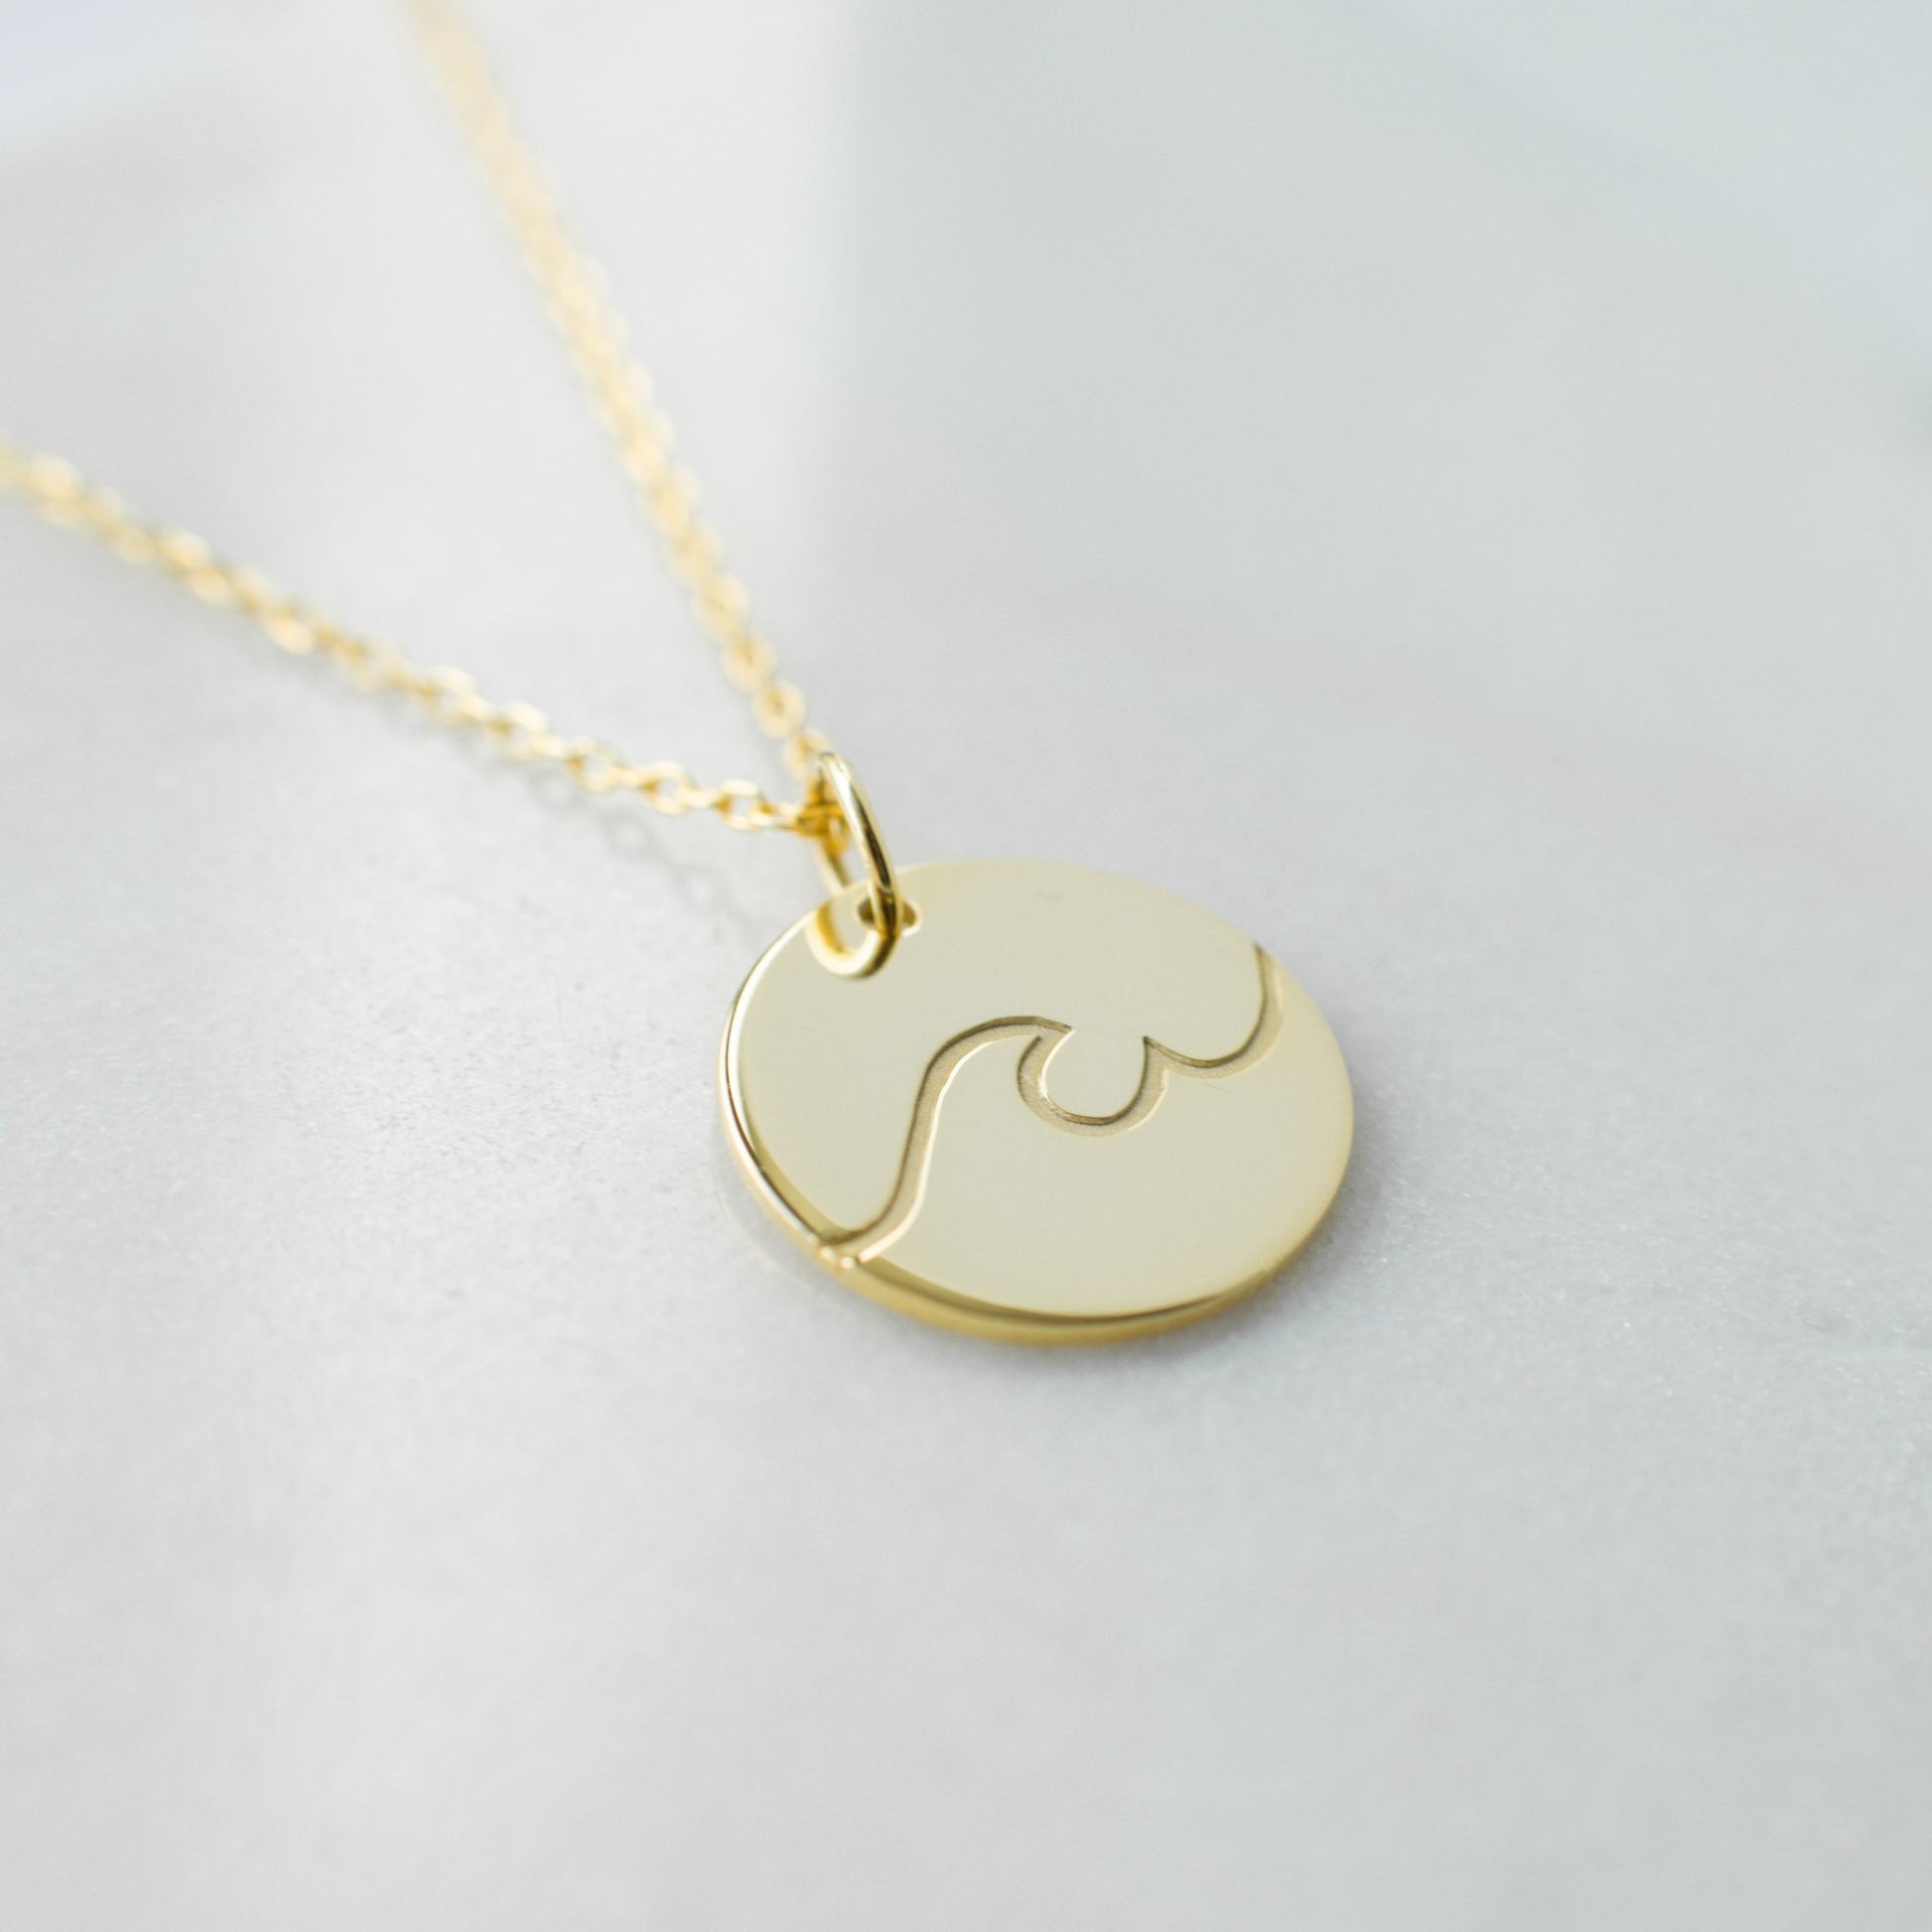 14K Gold plated engraved wave necklace